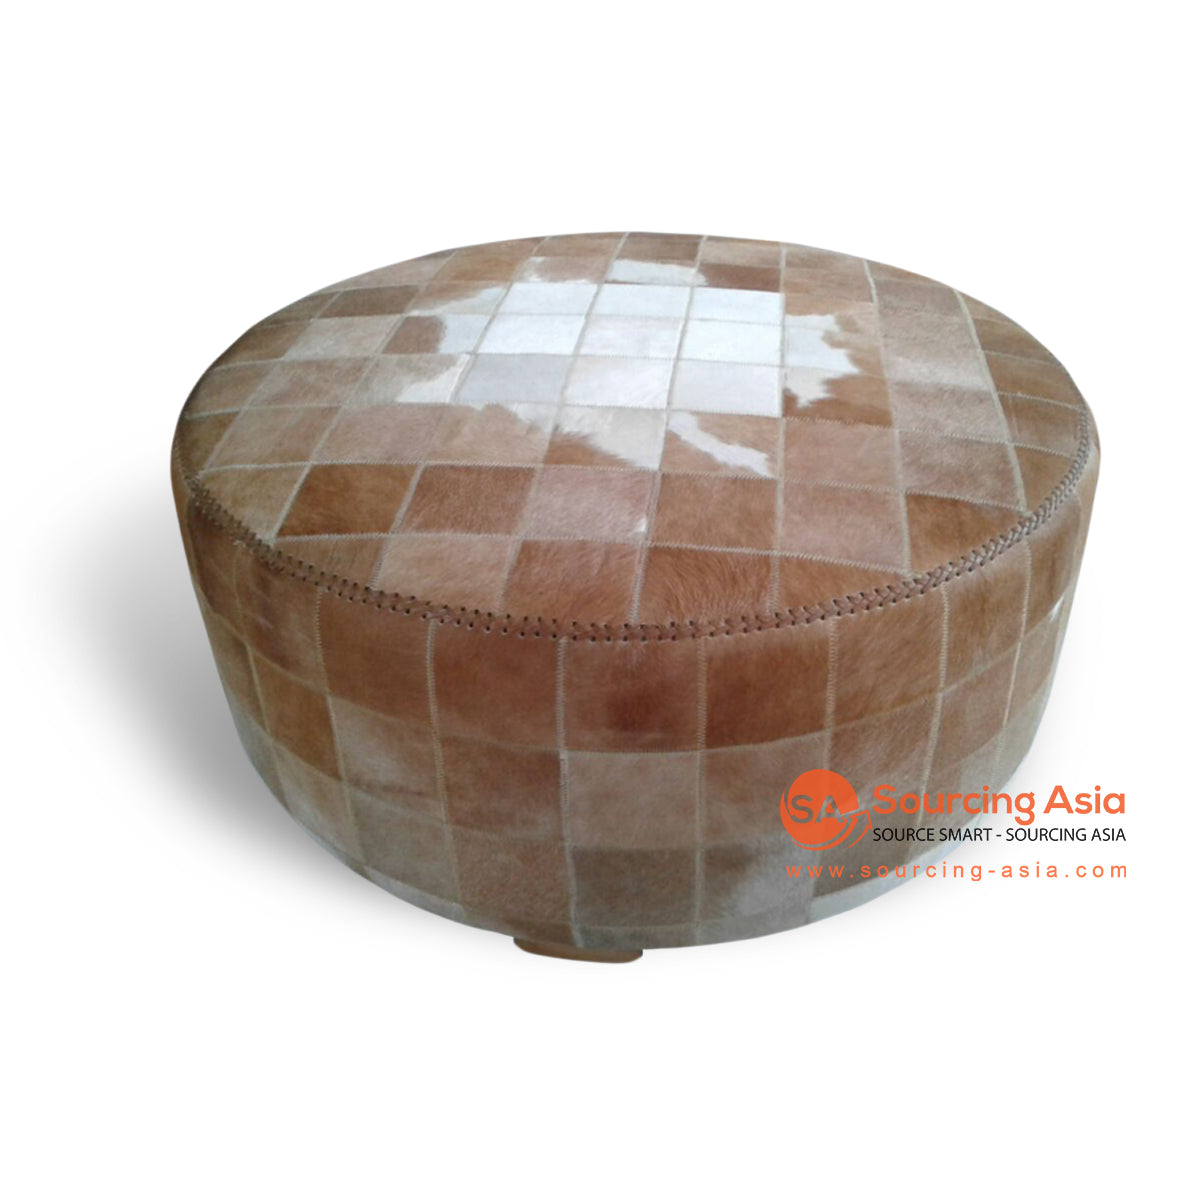 KUSJ007D-100 BROWN AND WHITE SPOT COWHIDE LEATHER ROUND OTTOMAN